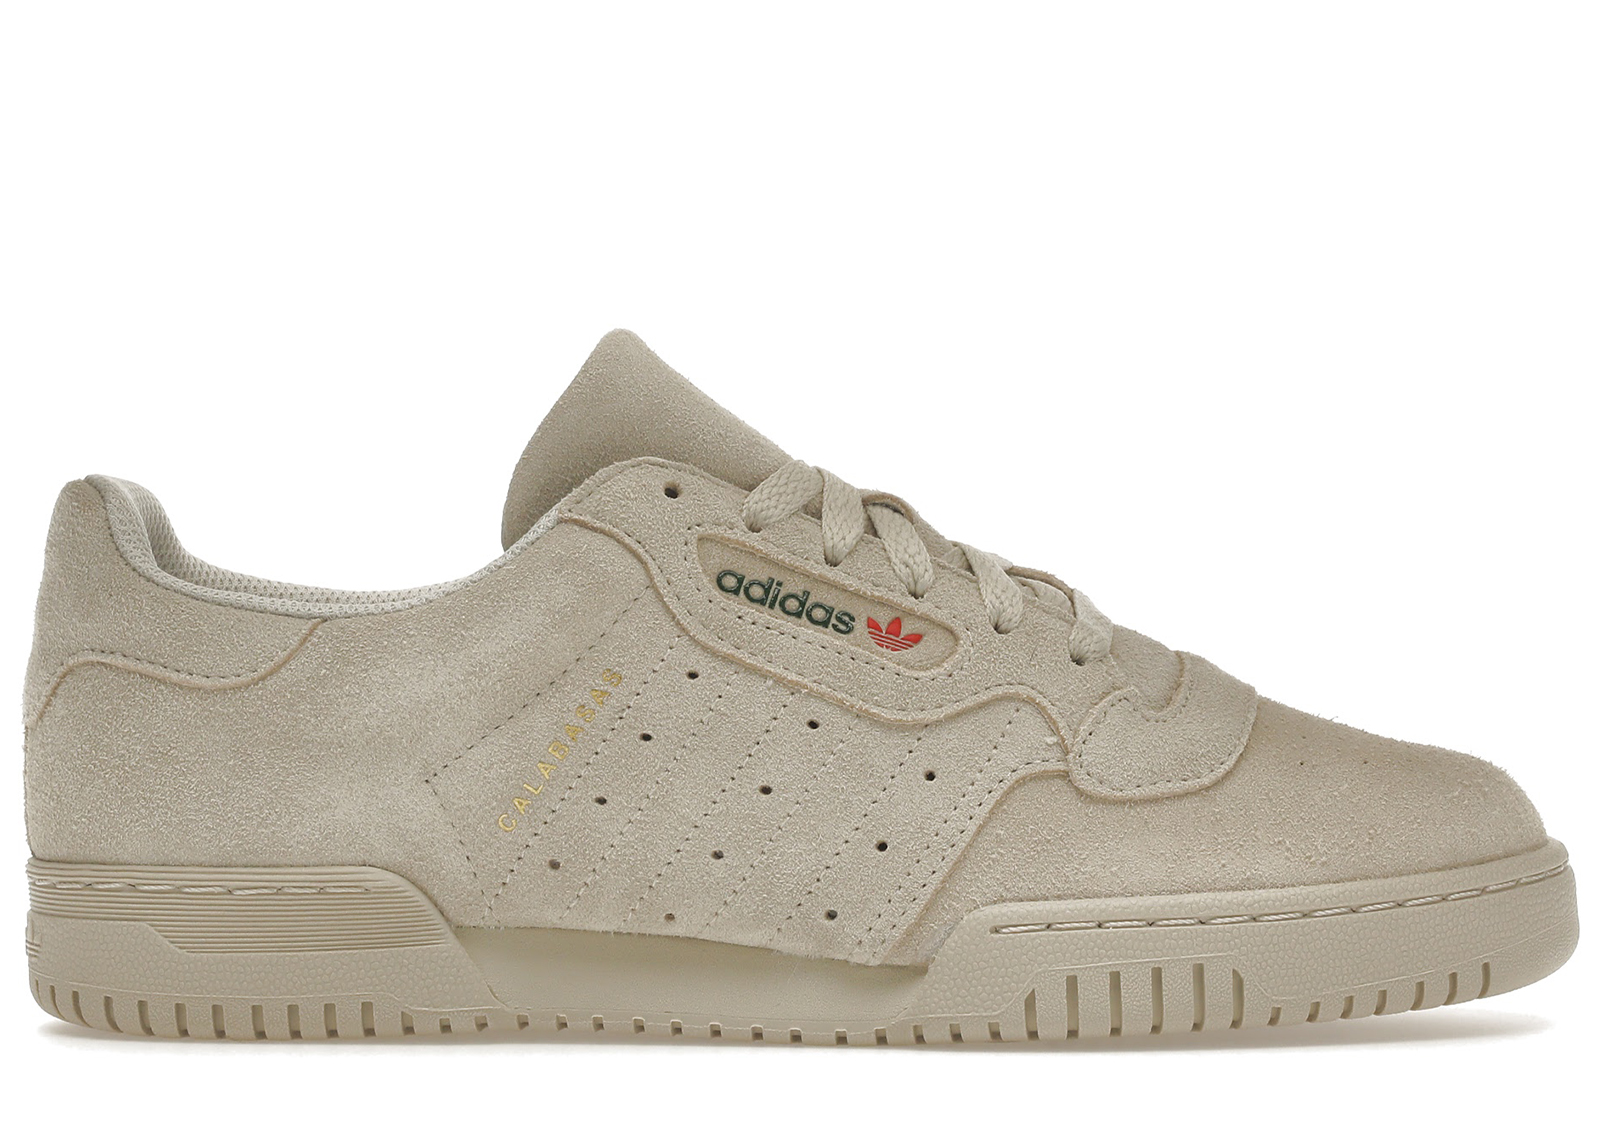 Buy adidas Yeezy Powerphase Shoes & New Sneakers - StockX